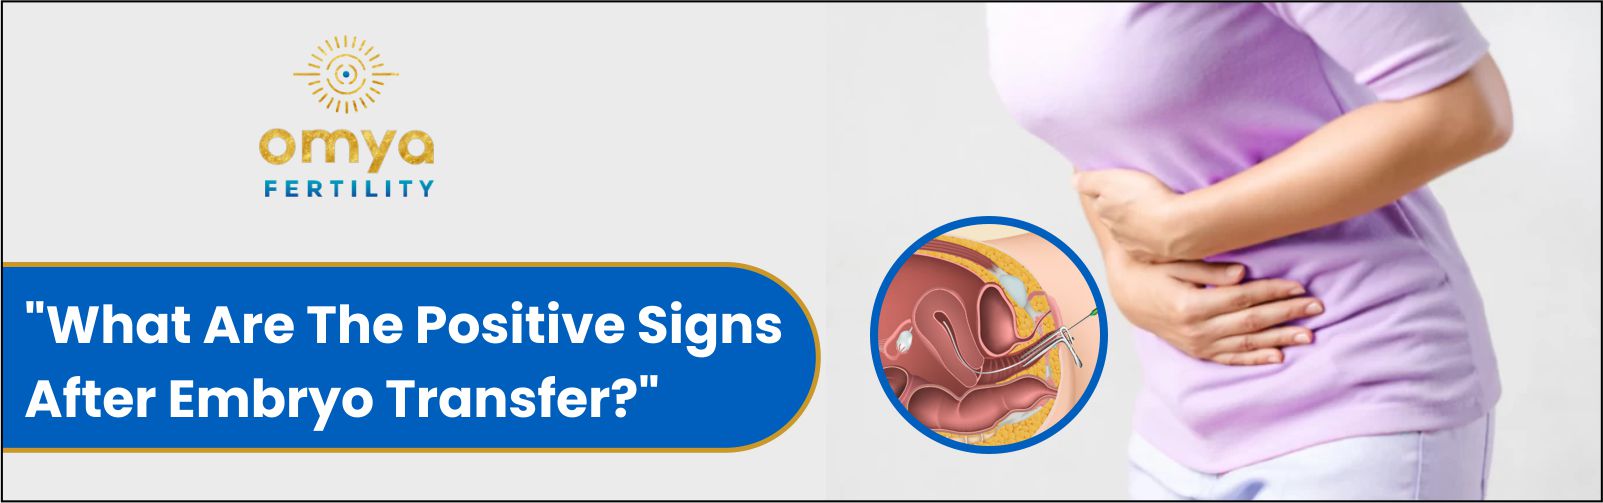 What are the positive signs after the embryo transfer?